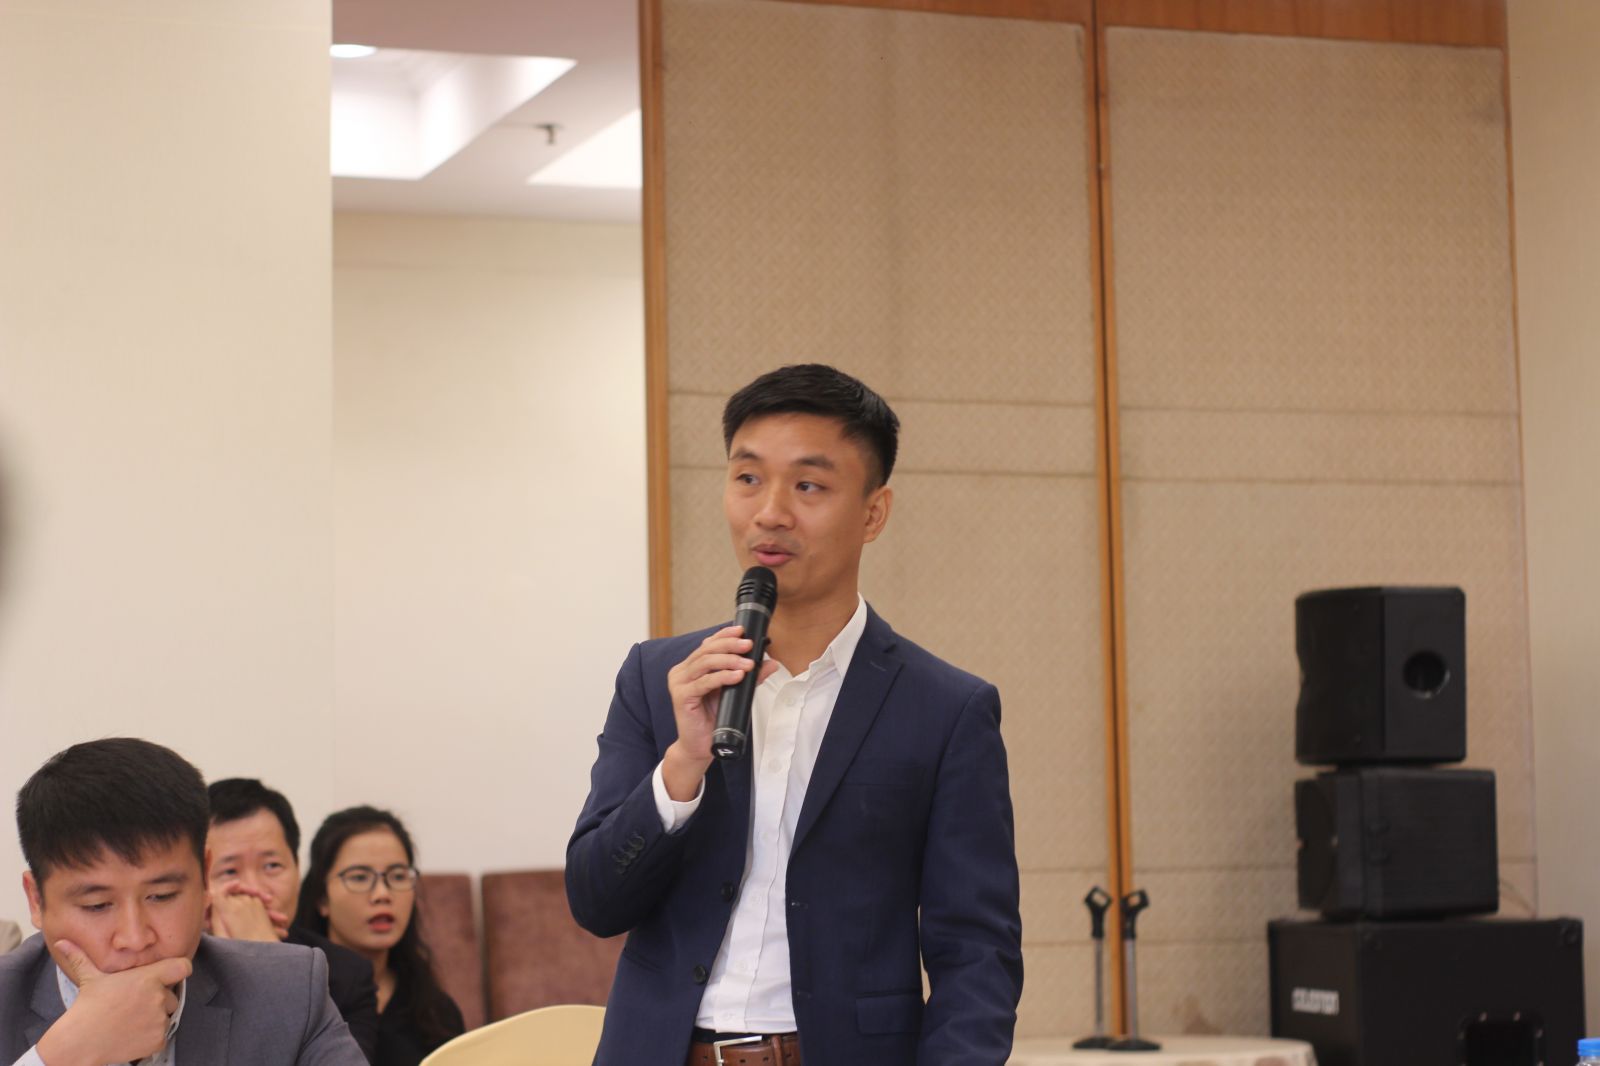 Nguyễn Thành Trung, Deputy director of Archi Invest JSC, speaks at the seminar.